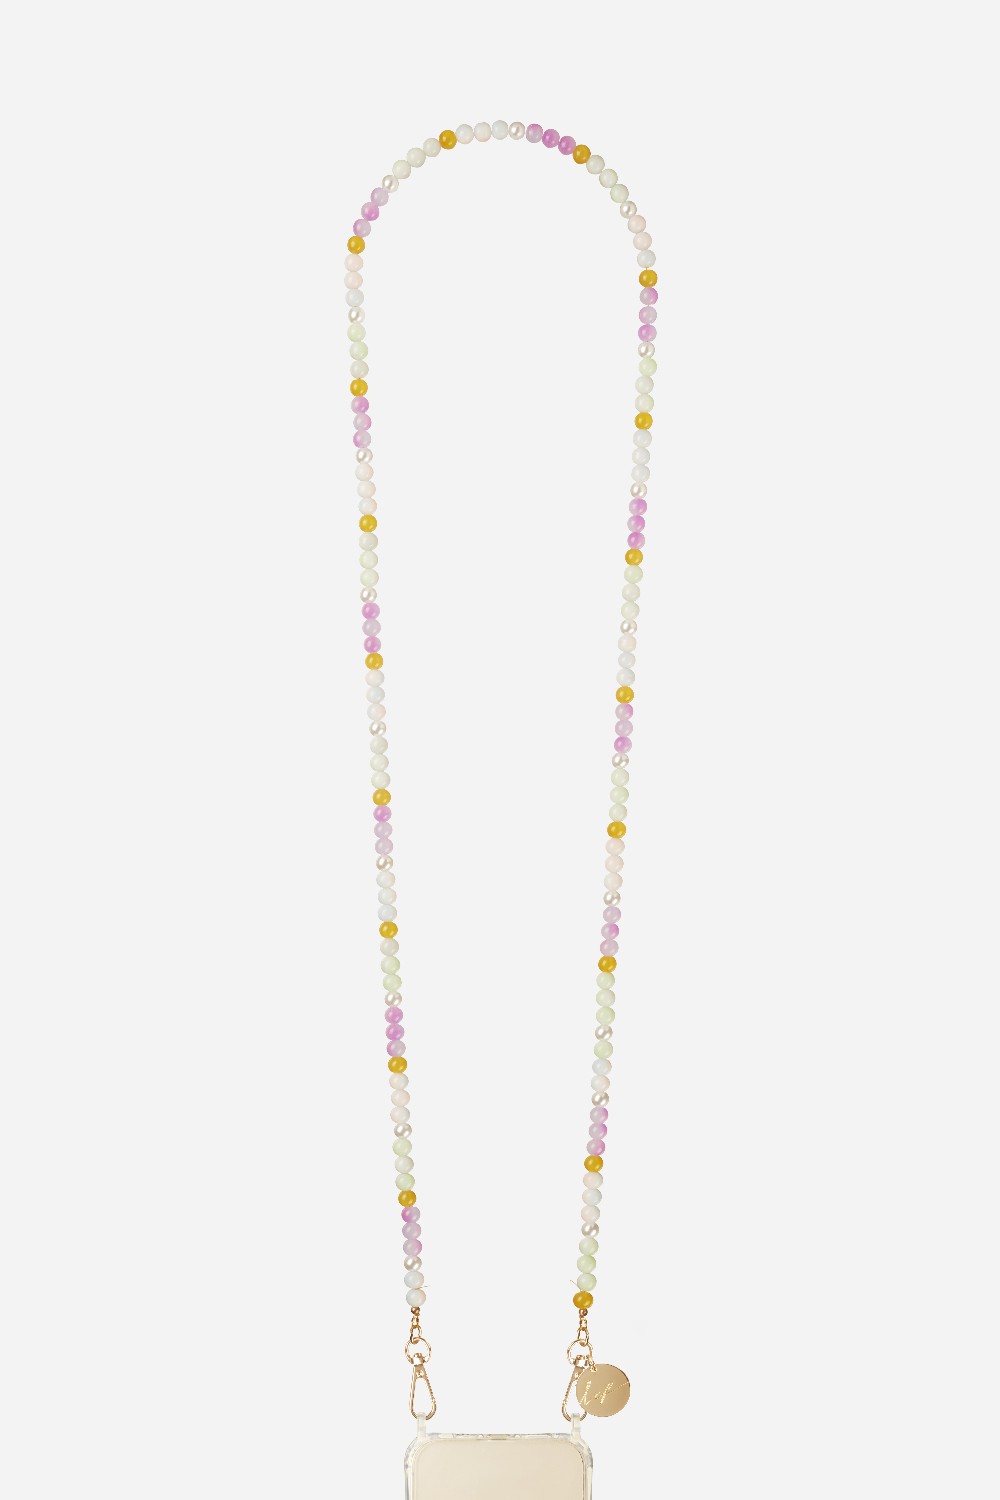 Andrea Long Chain Pink 120 cm